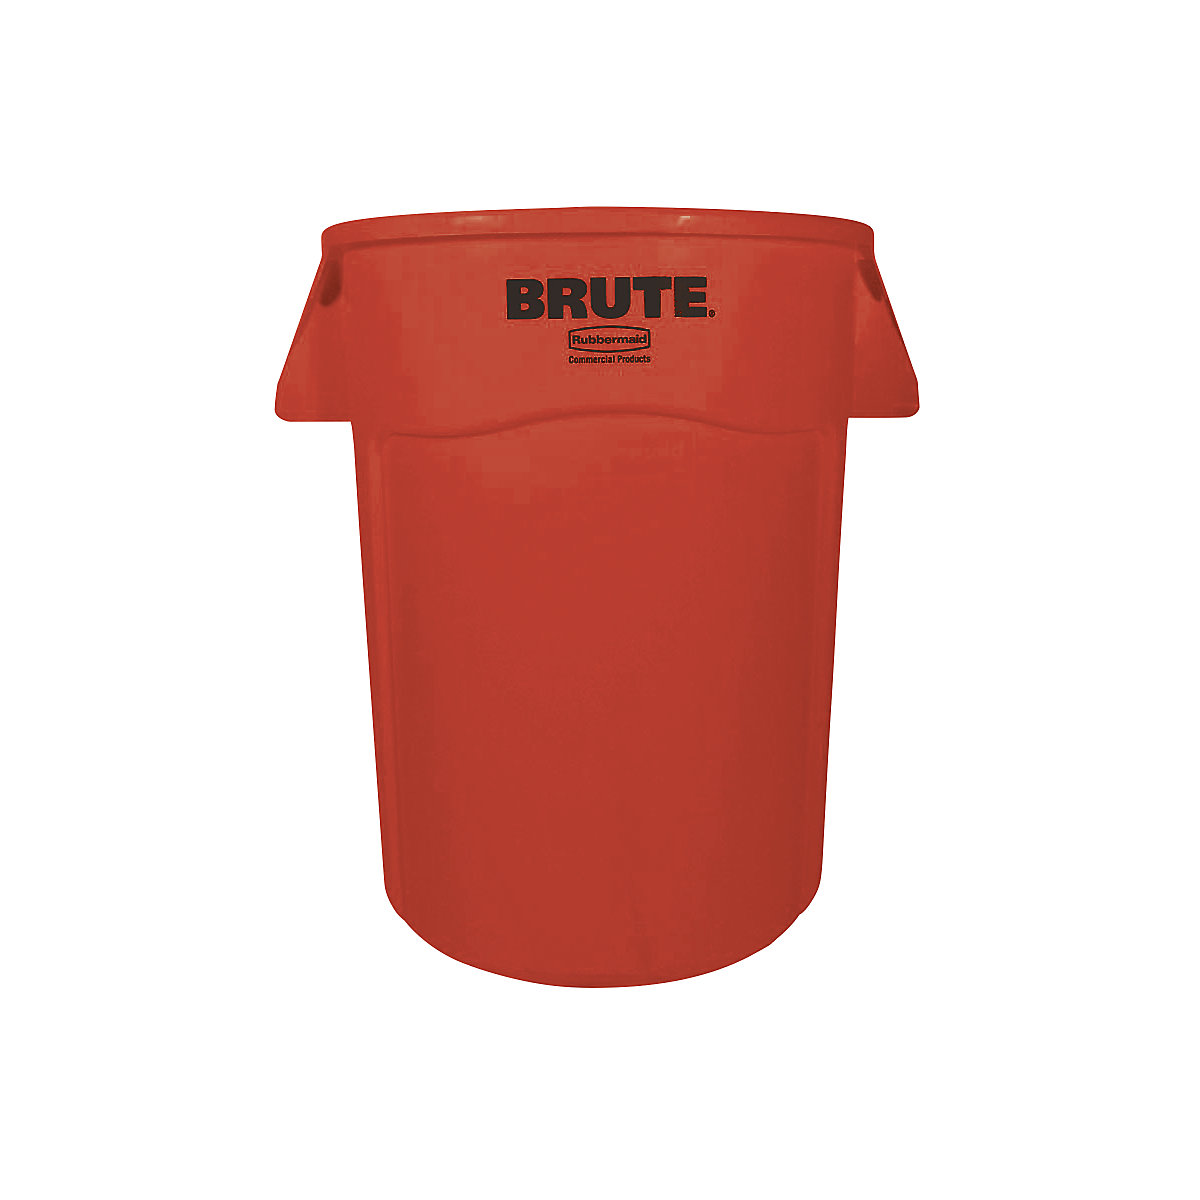 Rubbermaid – BRUTE® universal container/multi purpose container, round, capacity approx. 166 l, red